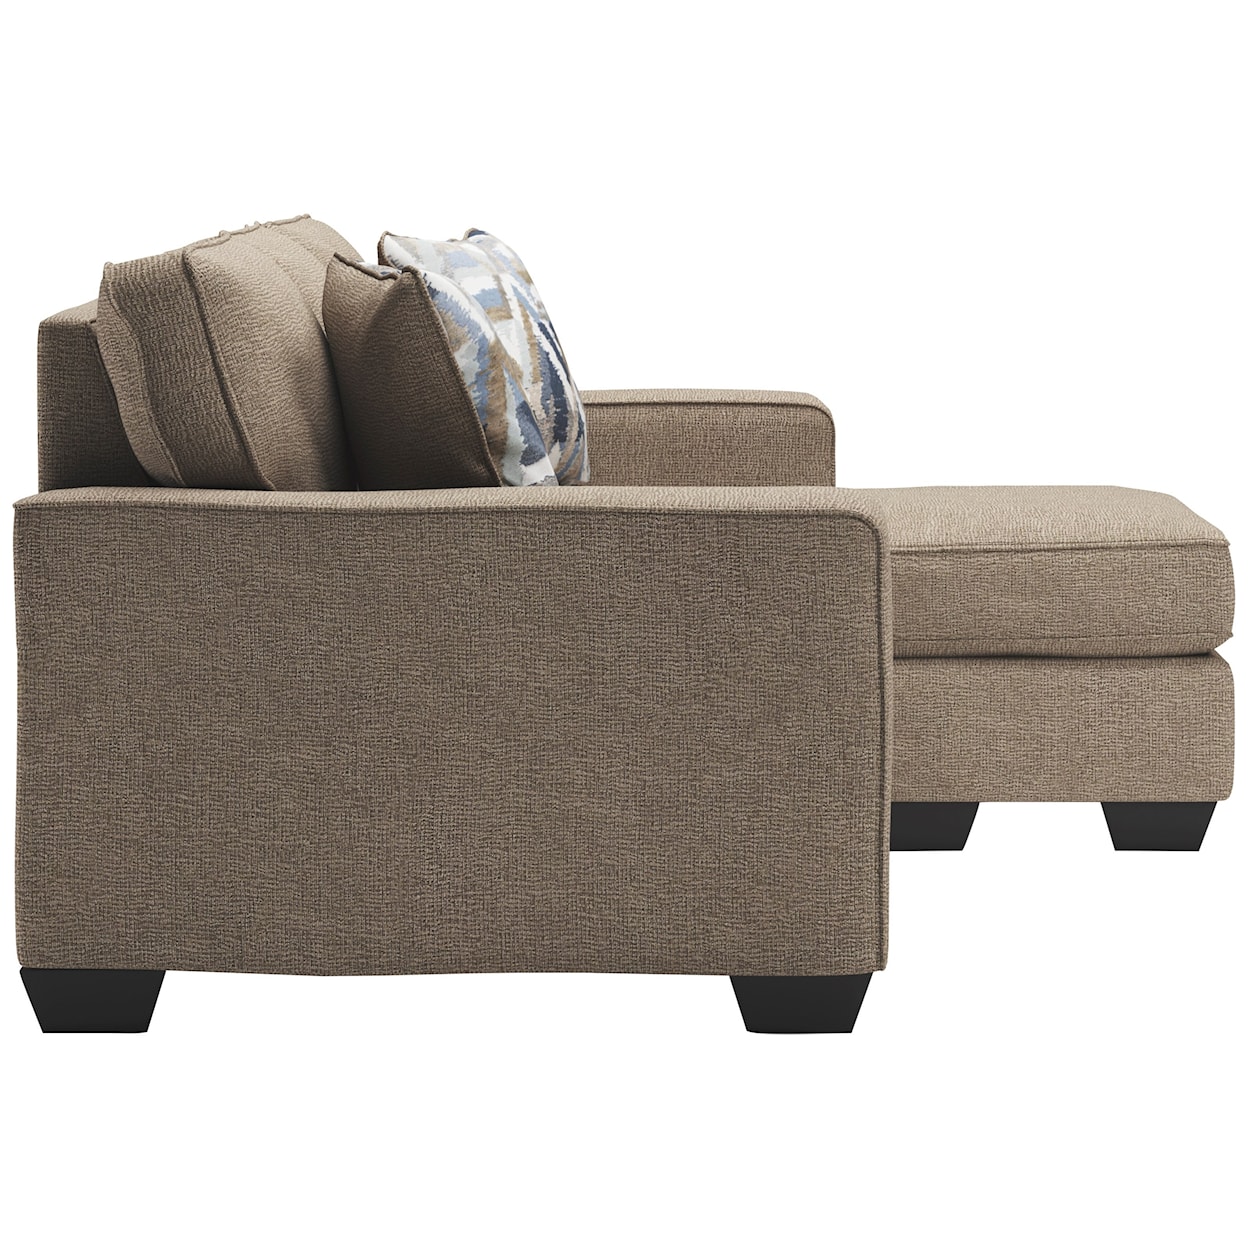 Signature Design By Ashley Greaves Ashh 5510518 Contemporary Sofa